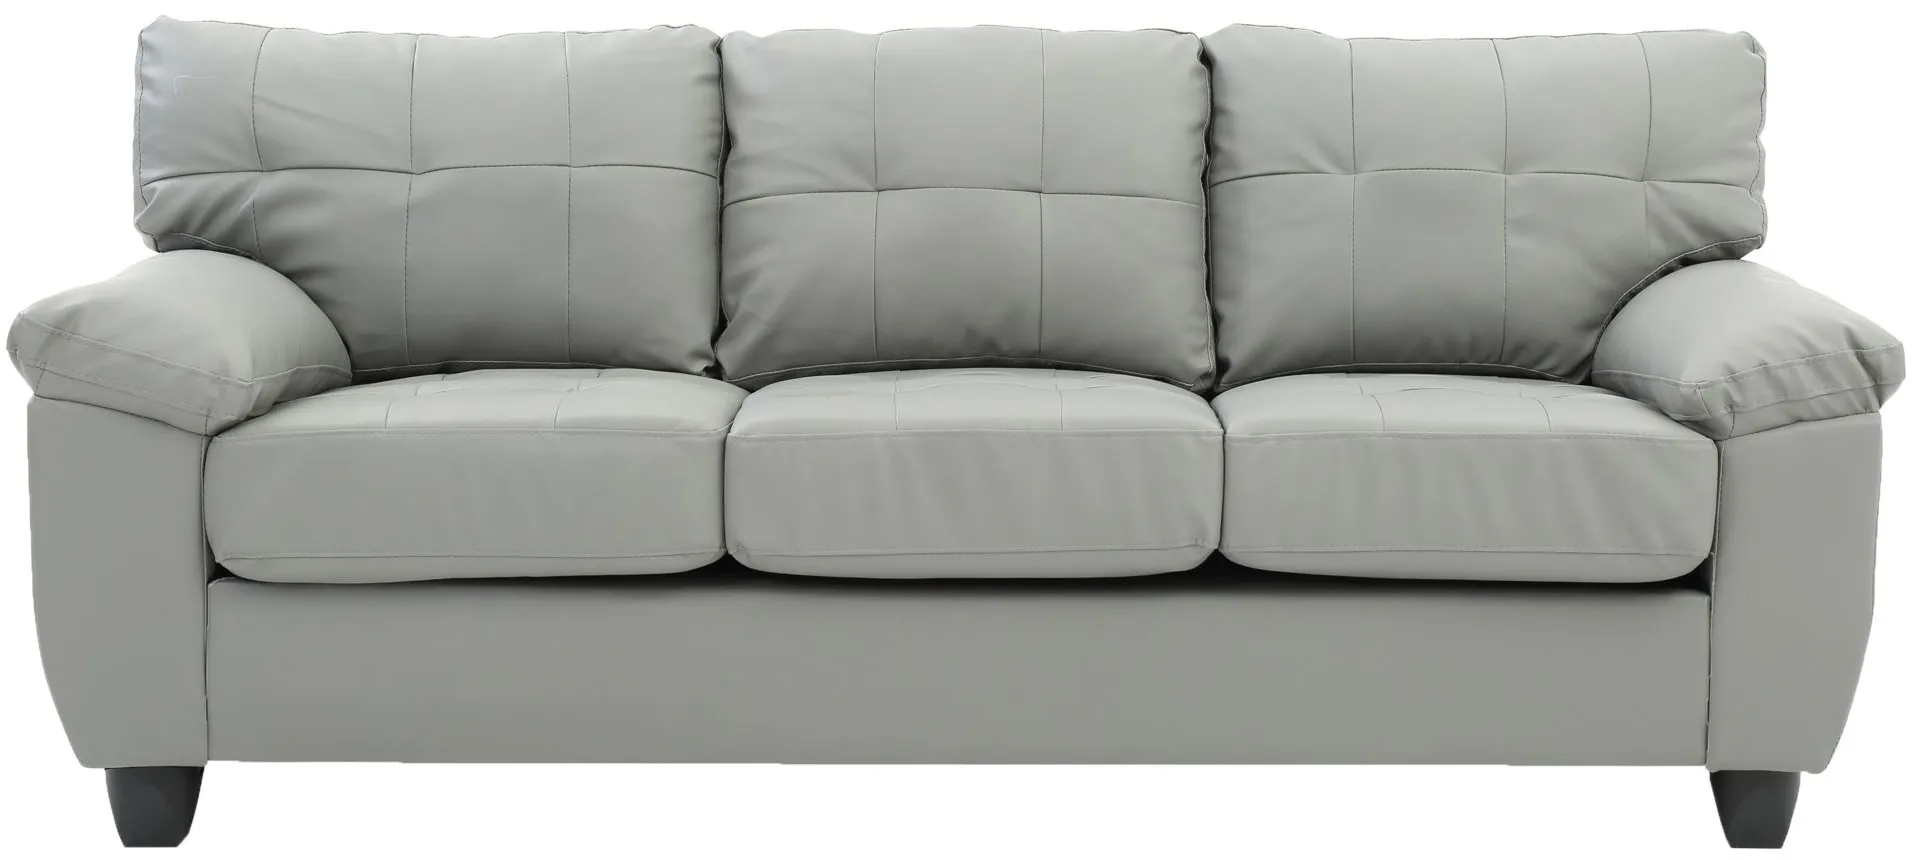 Gallant Sofa in Gray by Glory Furniture